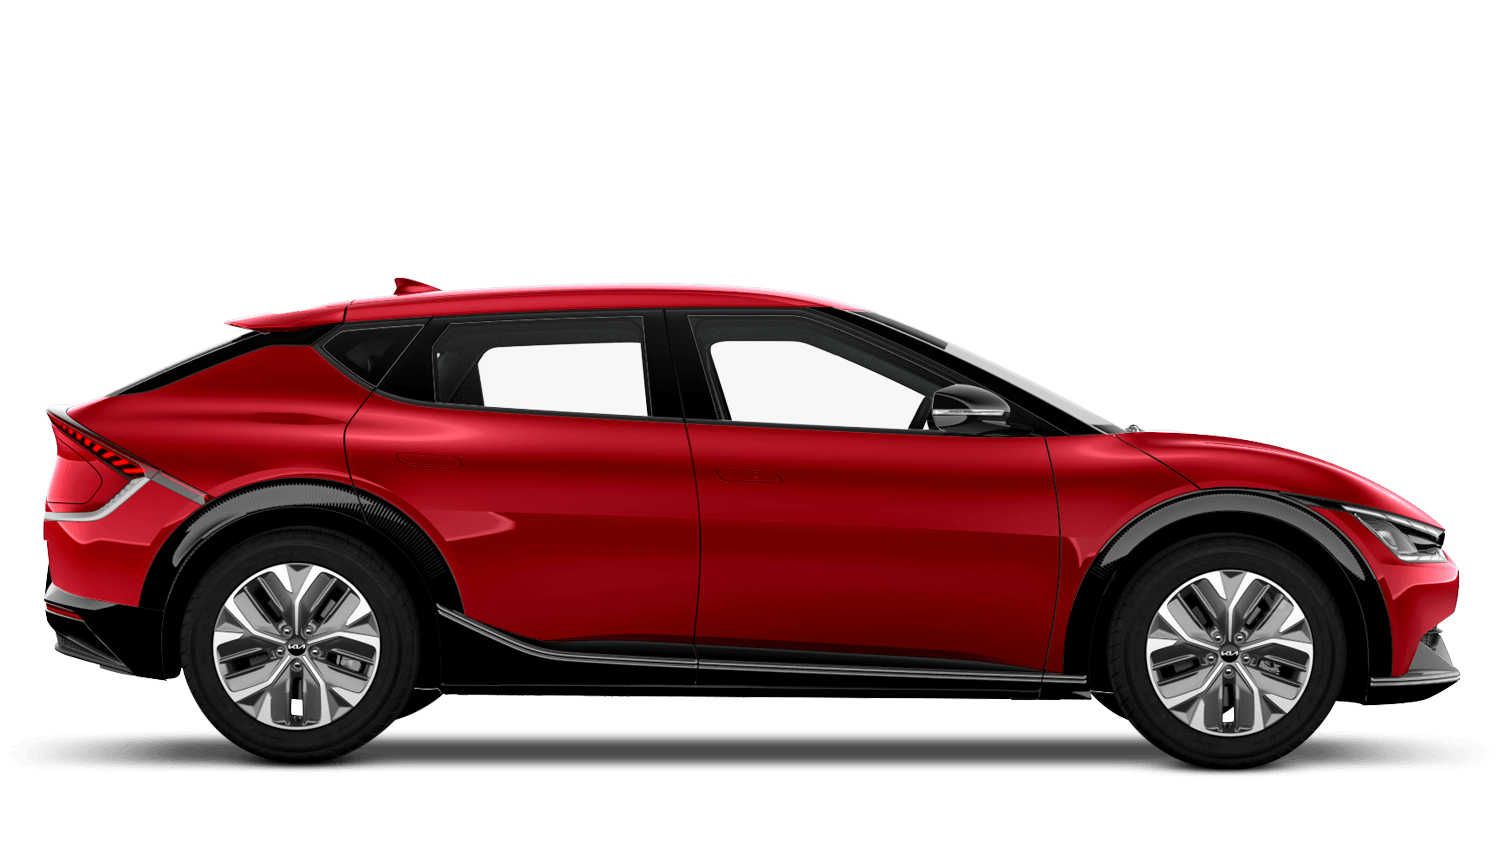 Kia EV6 - Fully Electric Crossover Moving Towards The Future